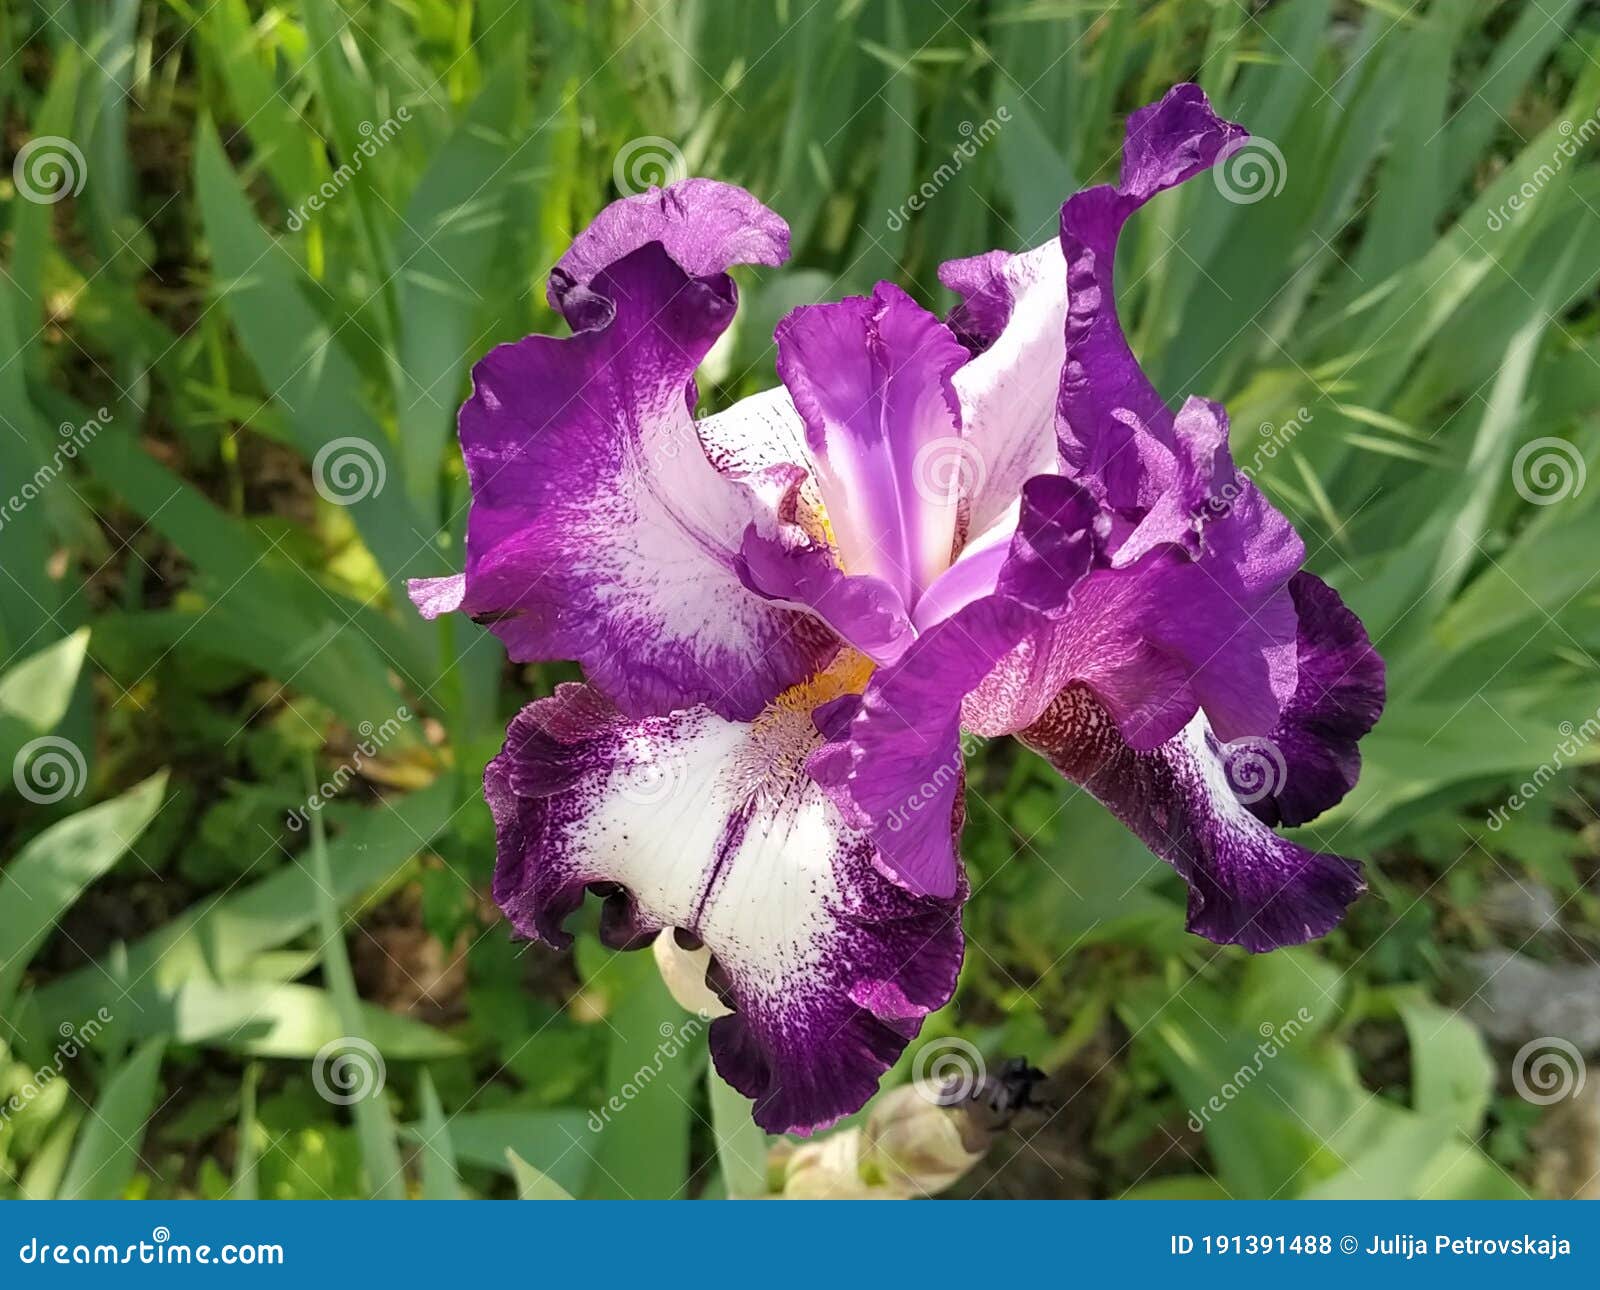 Beautiful Purple Iris with a White Middle. Curved Graceful Bright ...